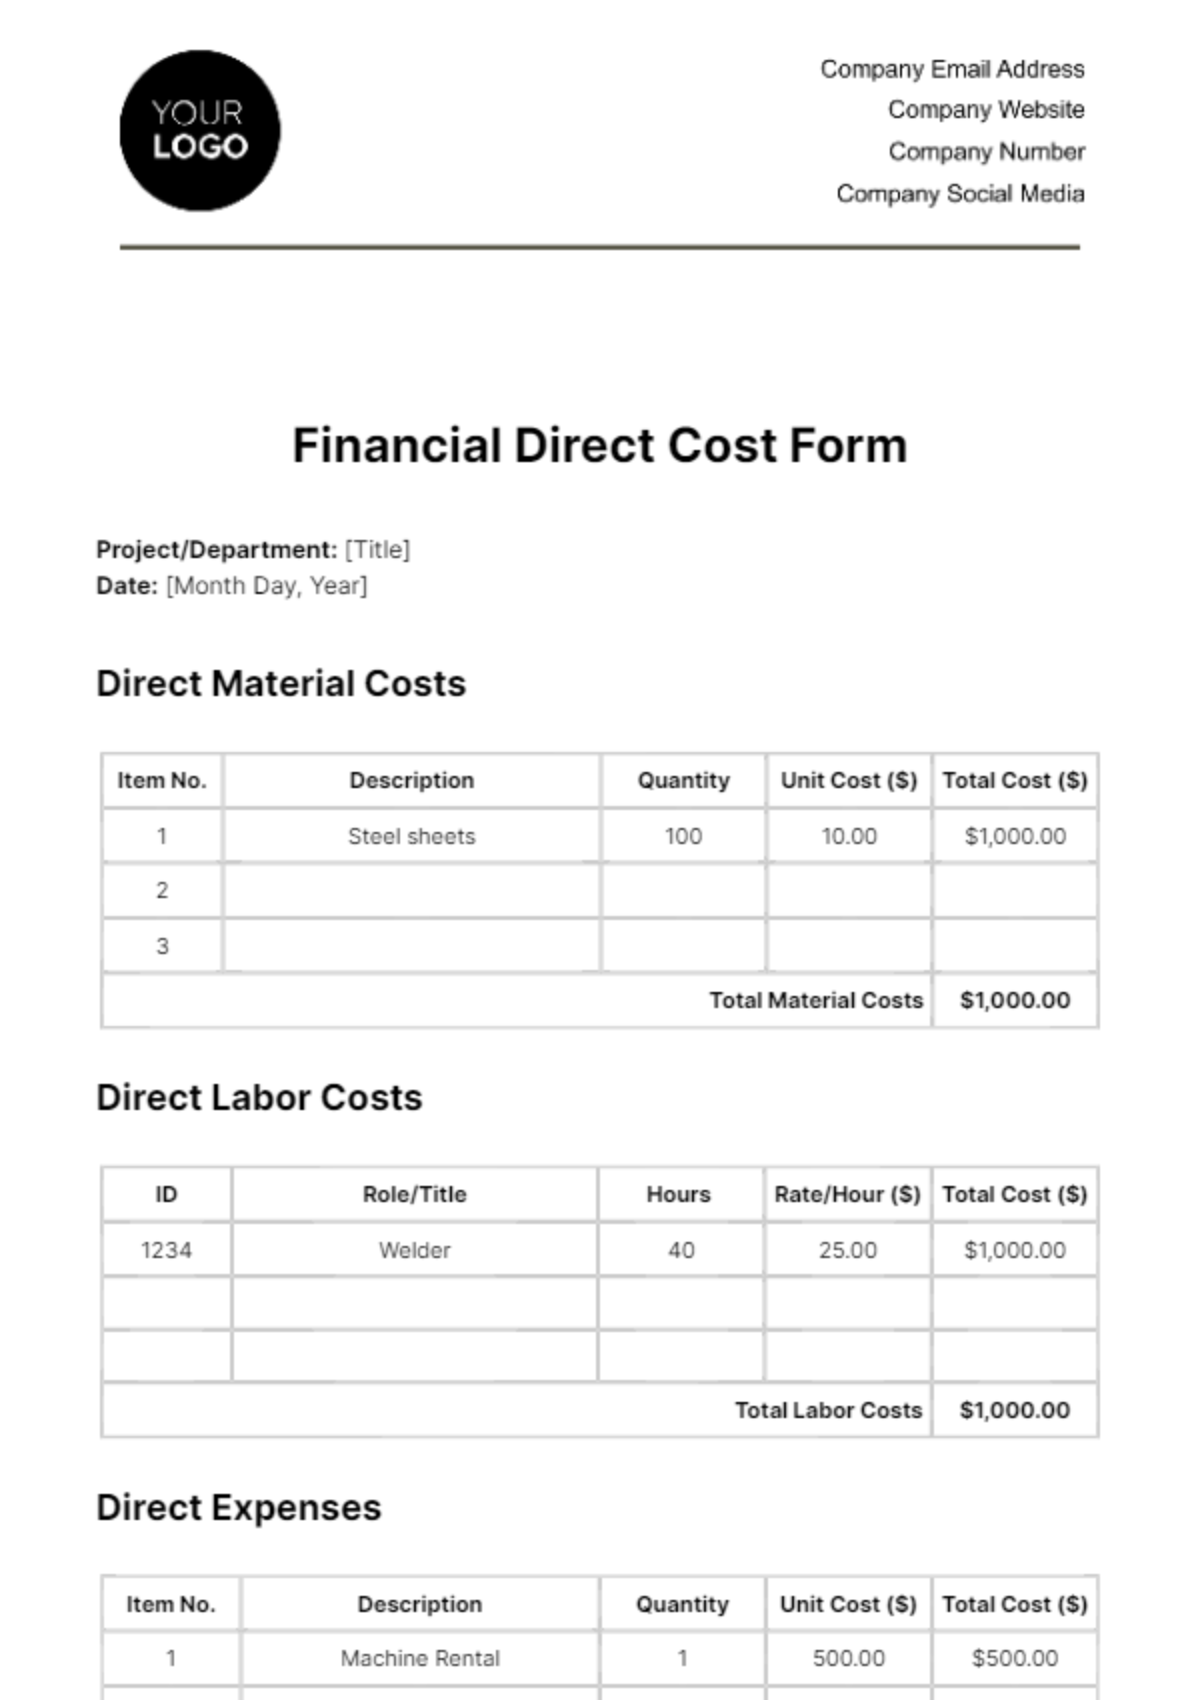 Financial Direct Cost Form Template